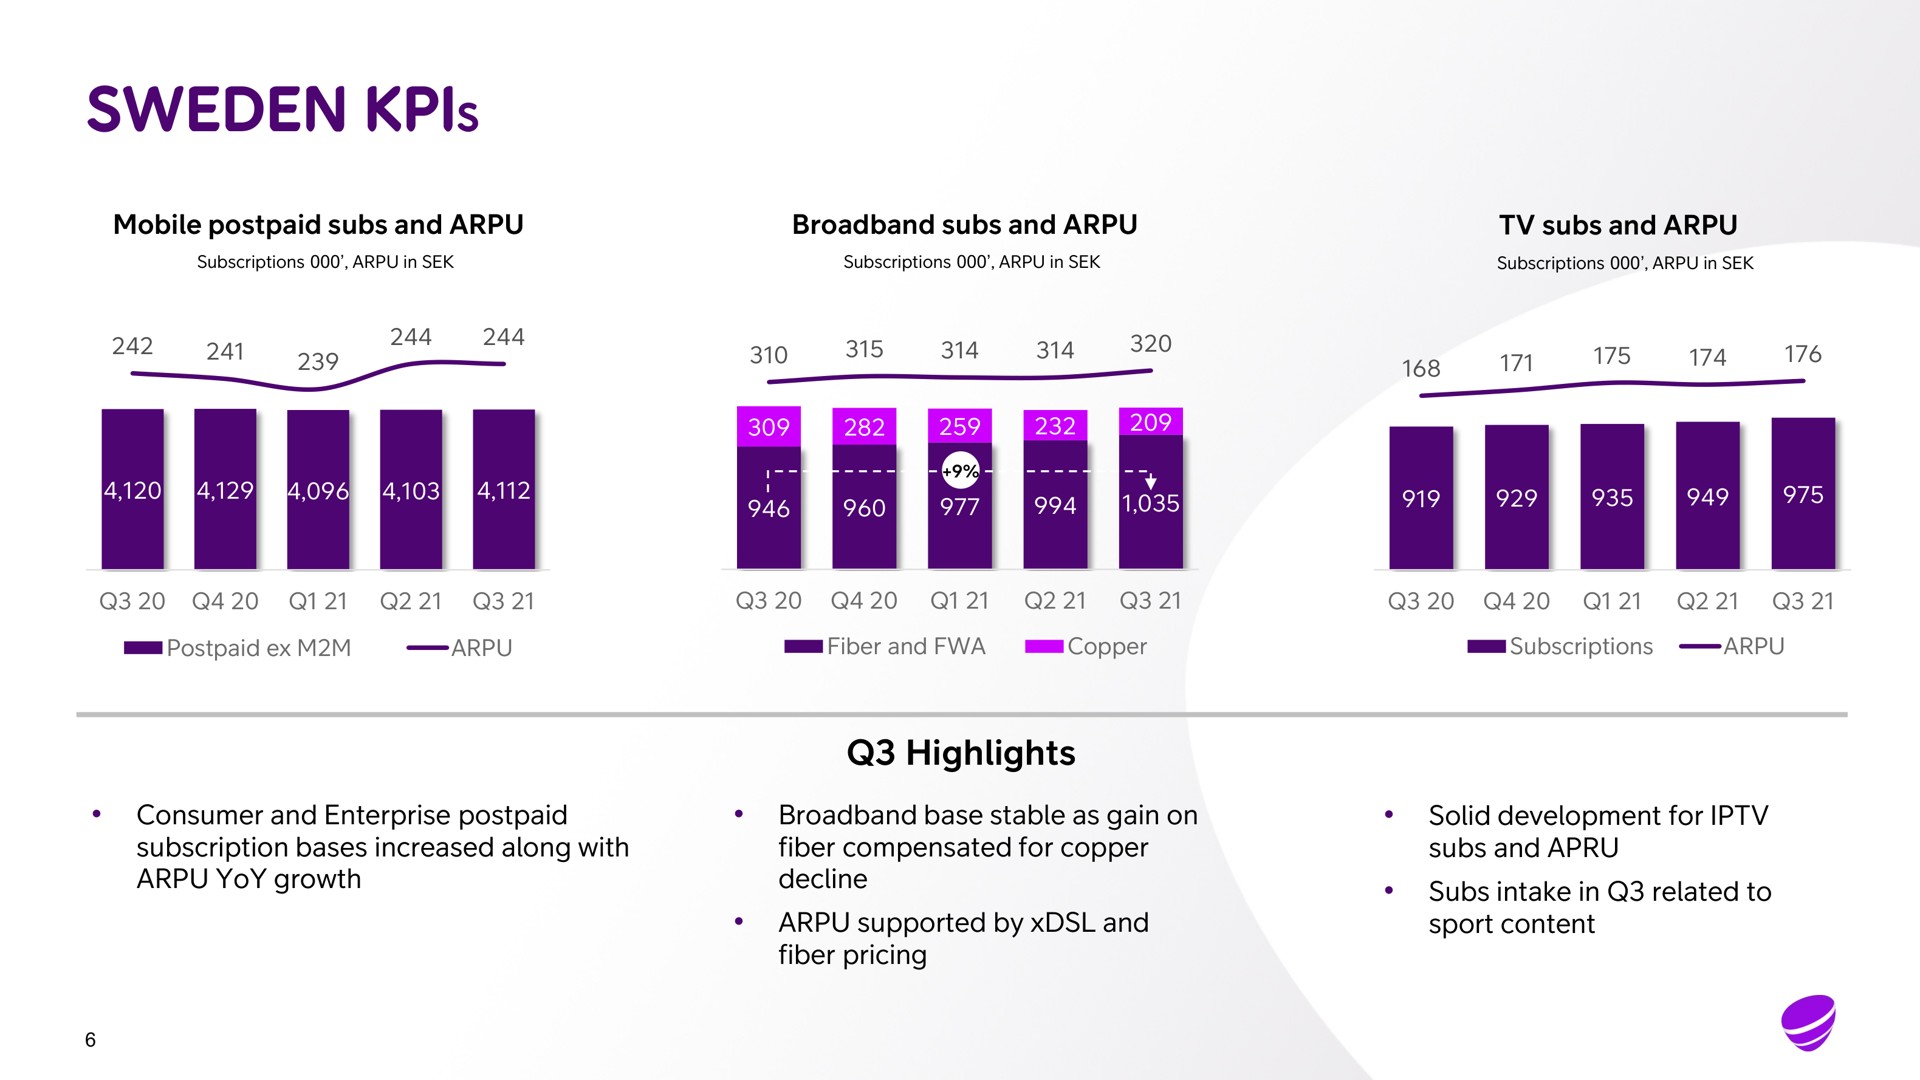 mobile postpaid subs and subs and subs and highlights consumer and enterprise postpaid subscription bases increased along with yoy growth base stable as gain on fiber compensated for copper decline supported by and fiber pricing solid development for subs and subs intake in related to sport content | Telia Company